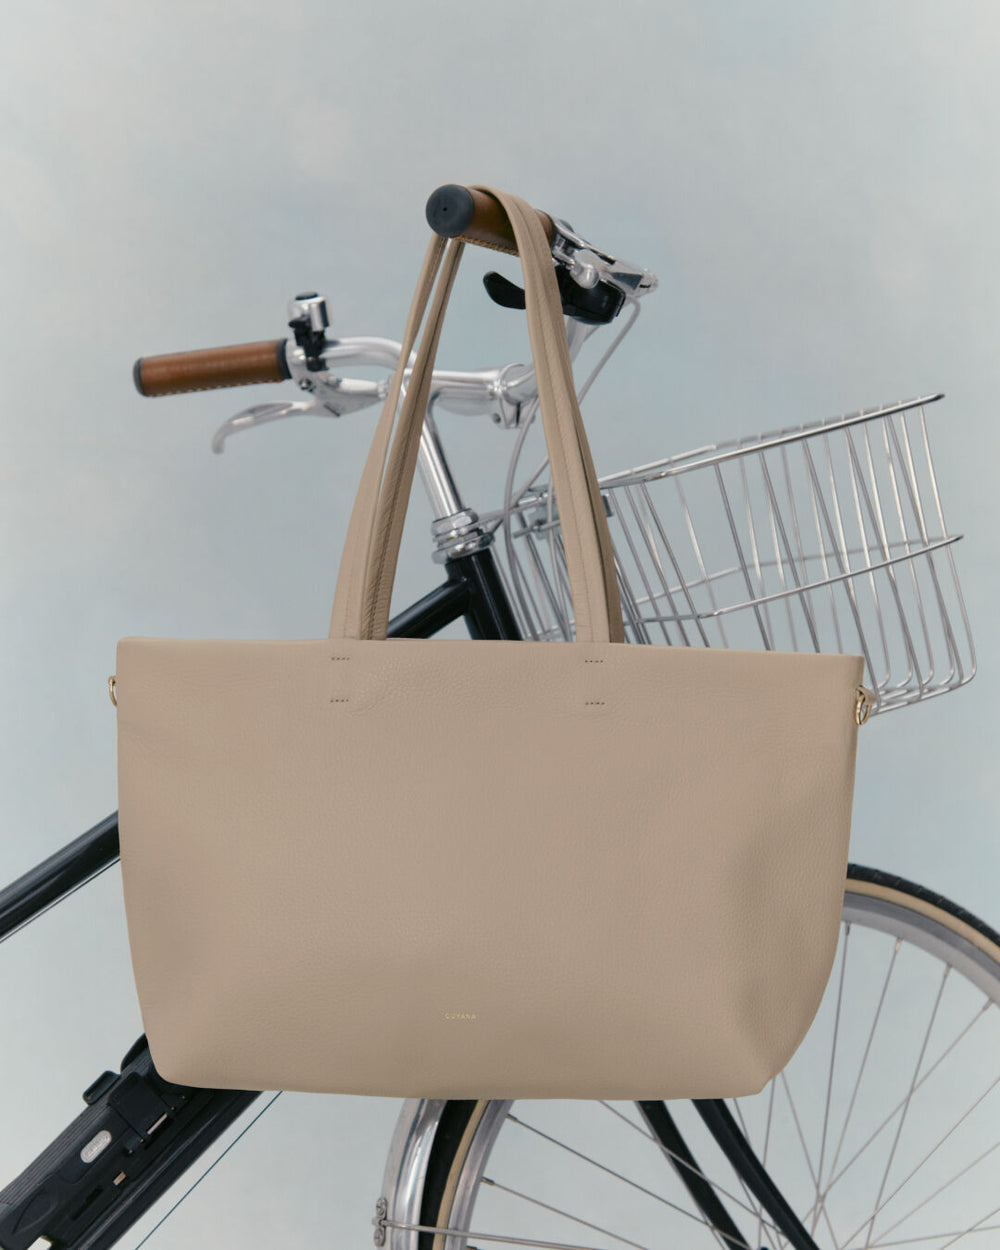 Handbag hanging on bicycle handlebar with a basket in the background.